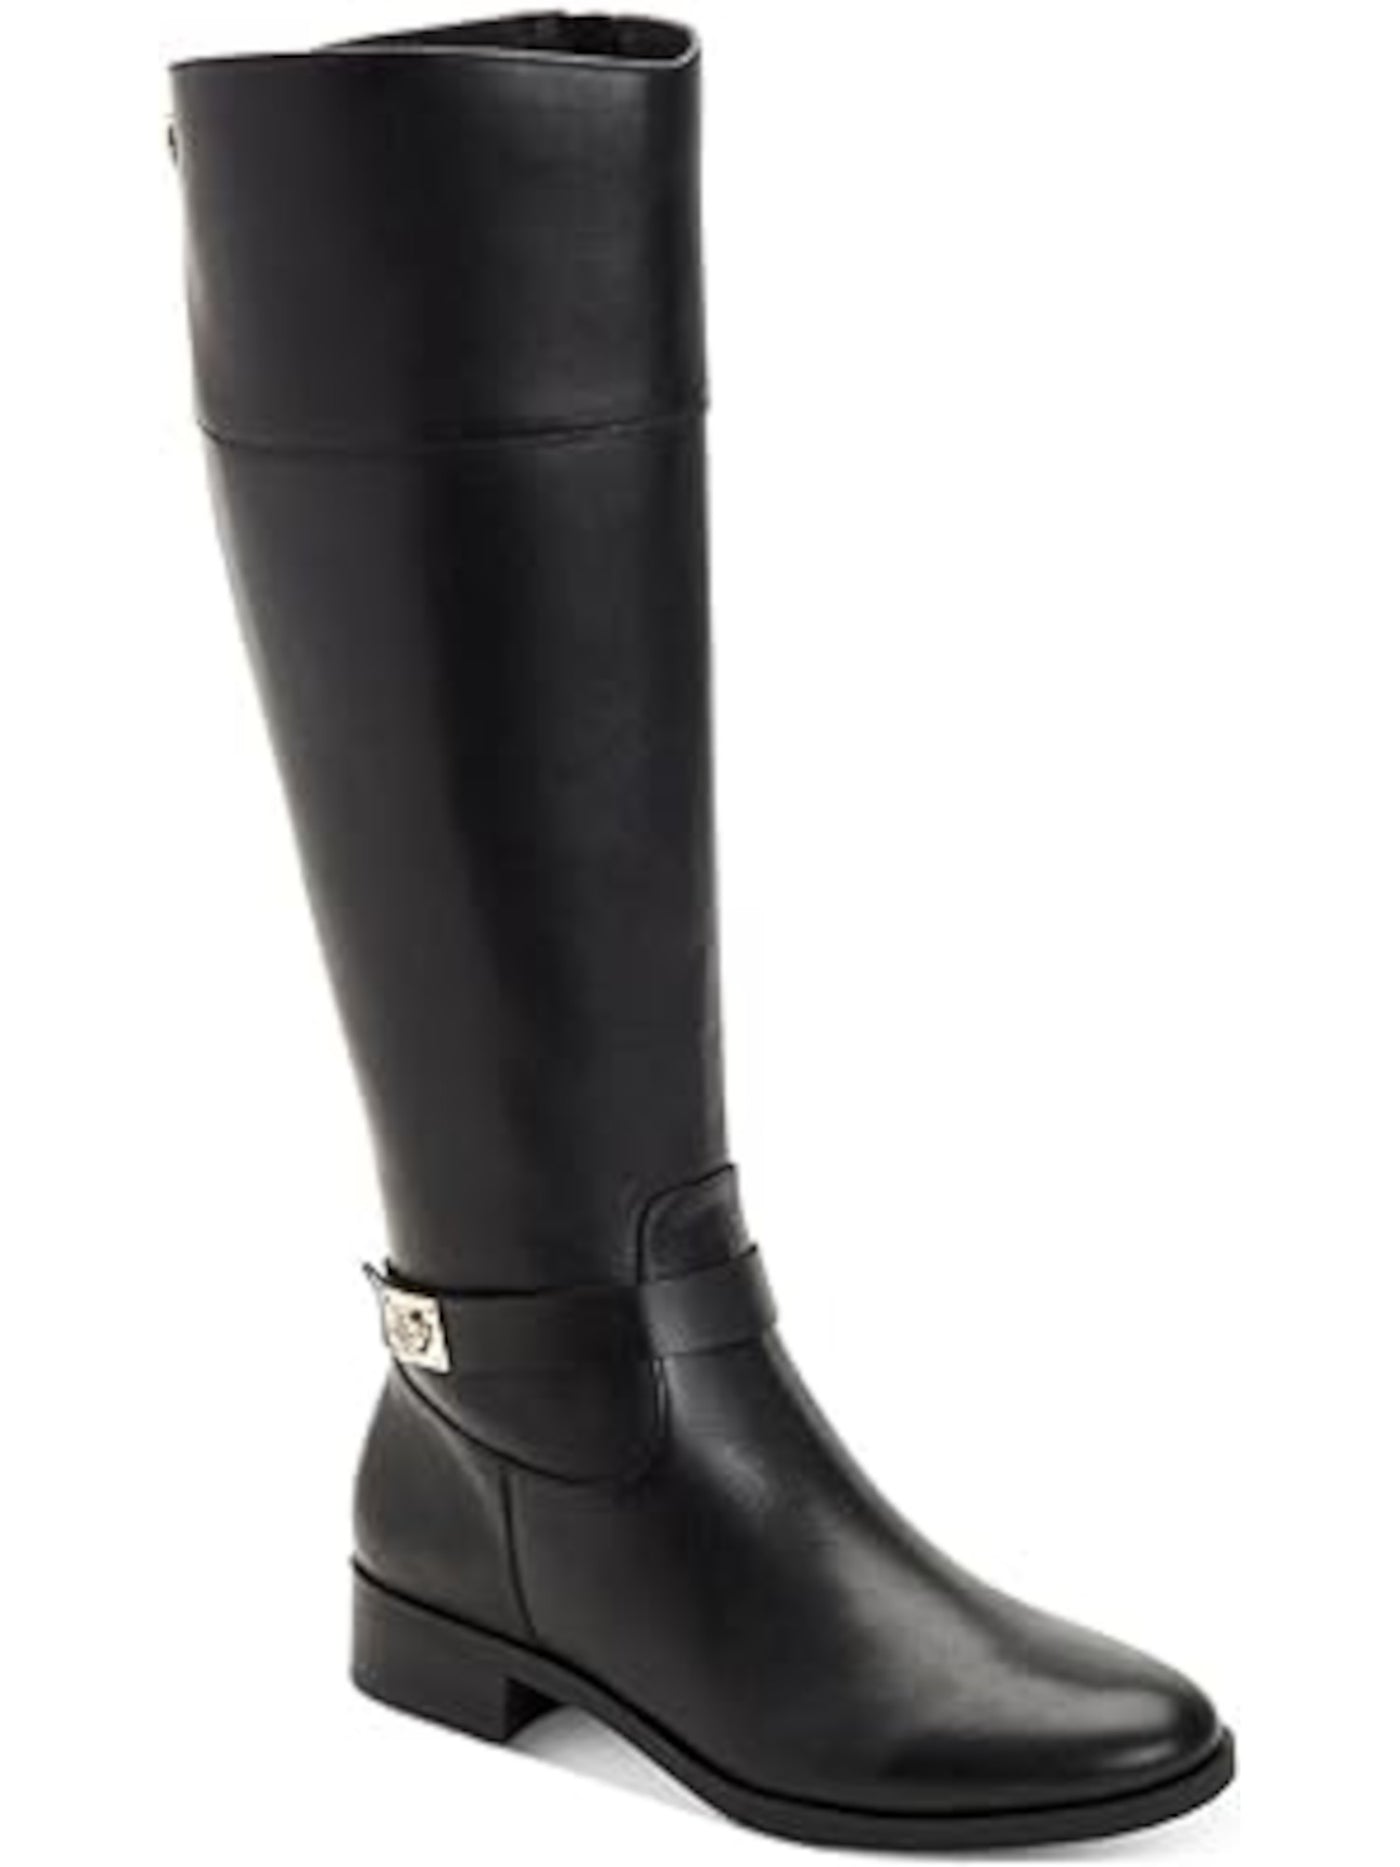 CHARTER CLUB Womens Black Buckle Accent Johannes Round Toe Zip-Up Riding Boot 5 M